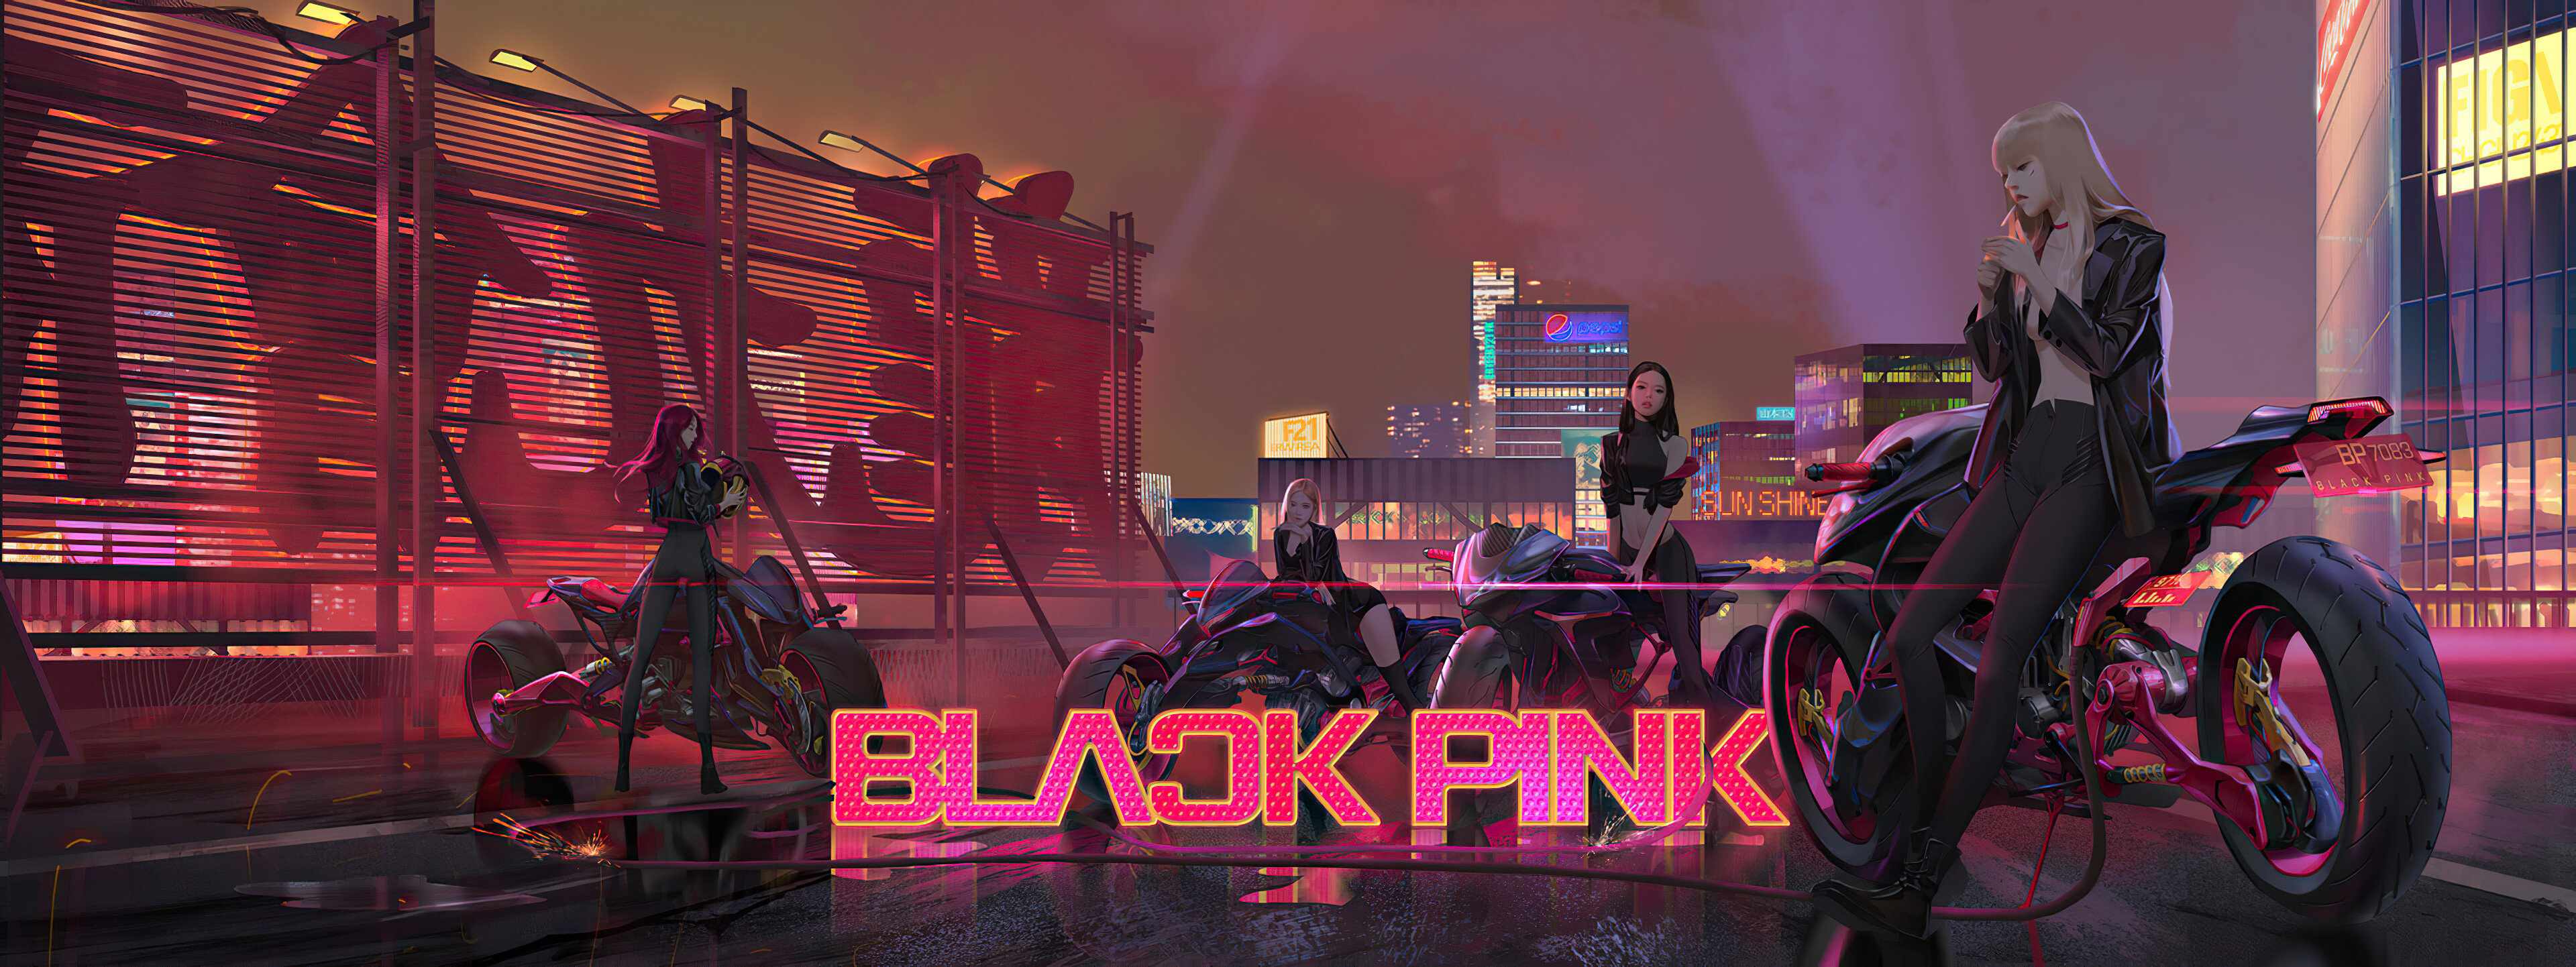 BLACKPINK: The band is the highest-charting female Korean act on the US Billboard Hot 100. 3840x1450 Dual Screen Background.